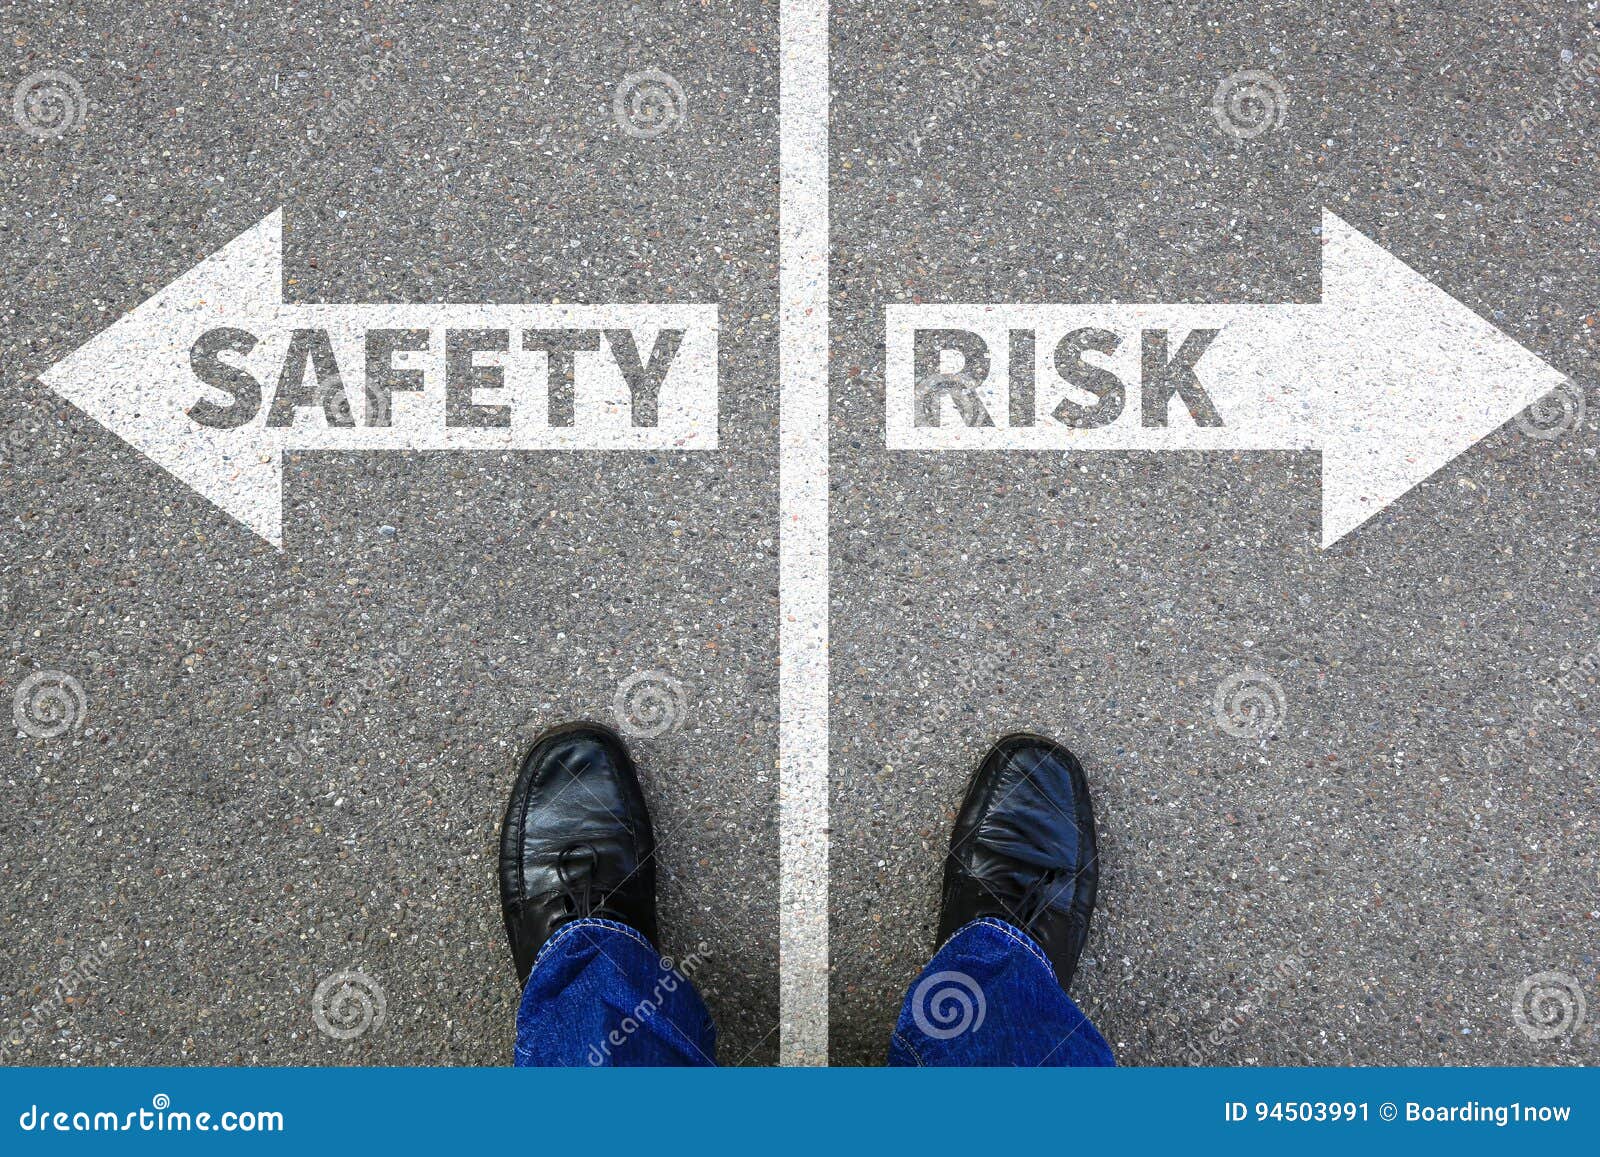 risk and safety management assessment analysis company business